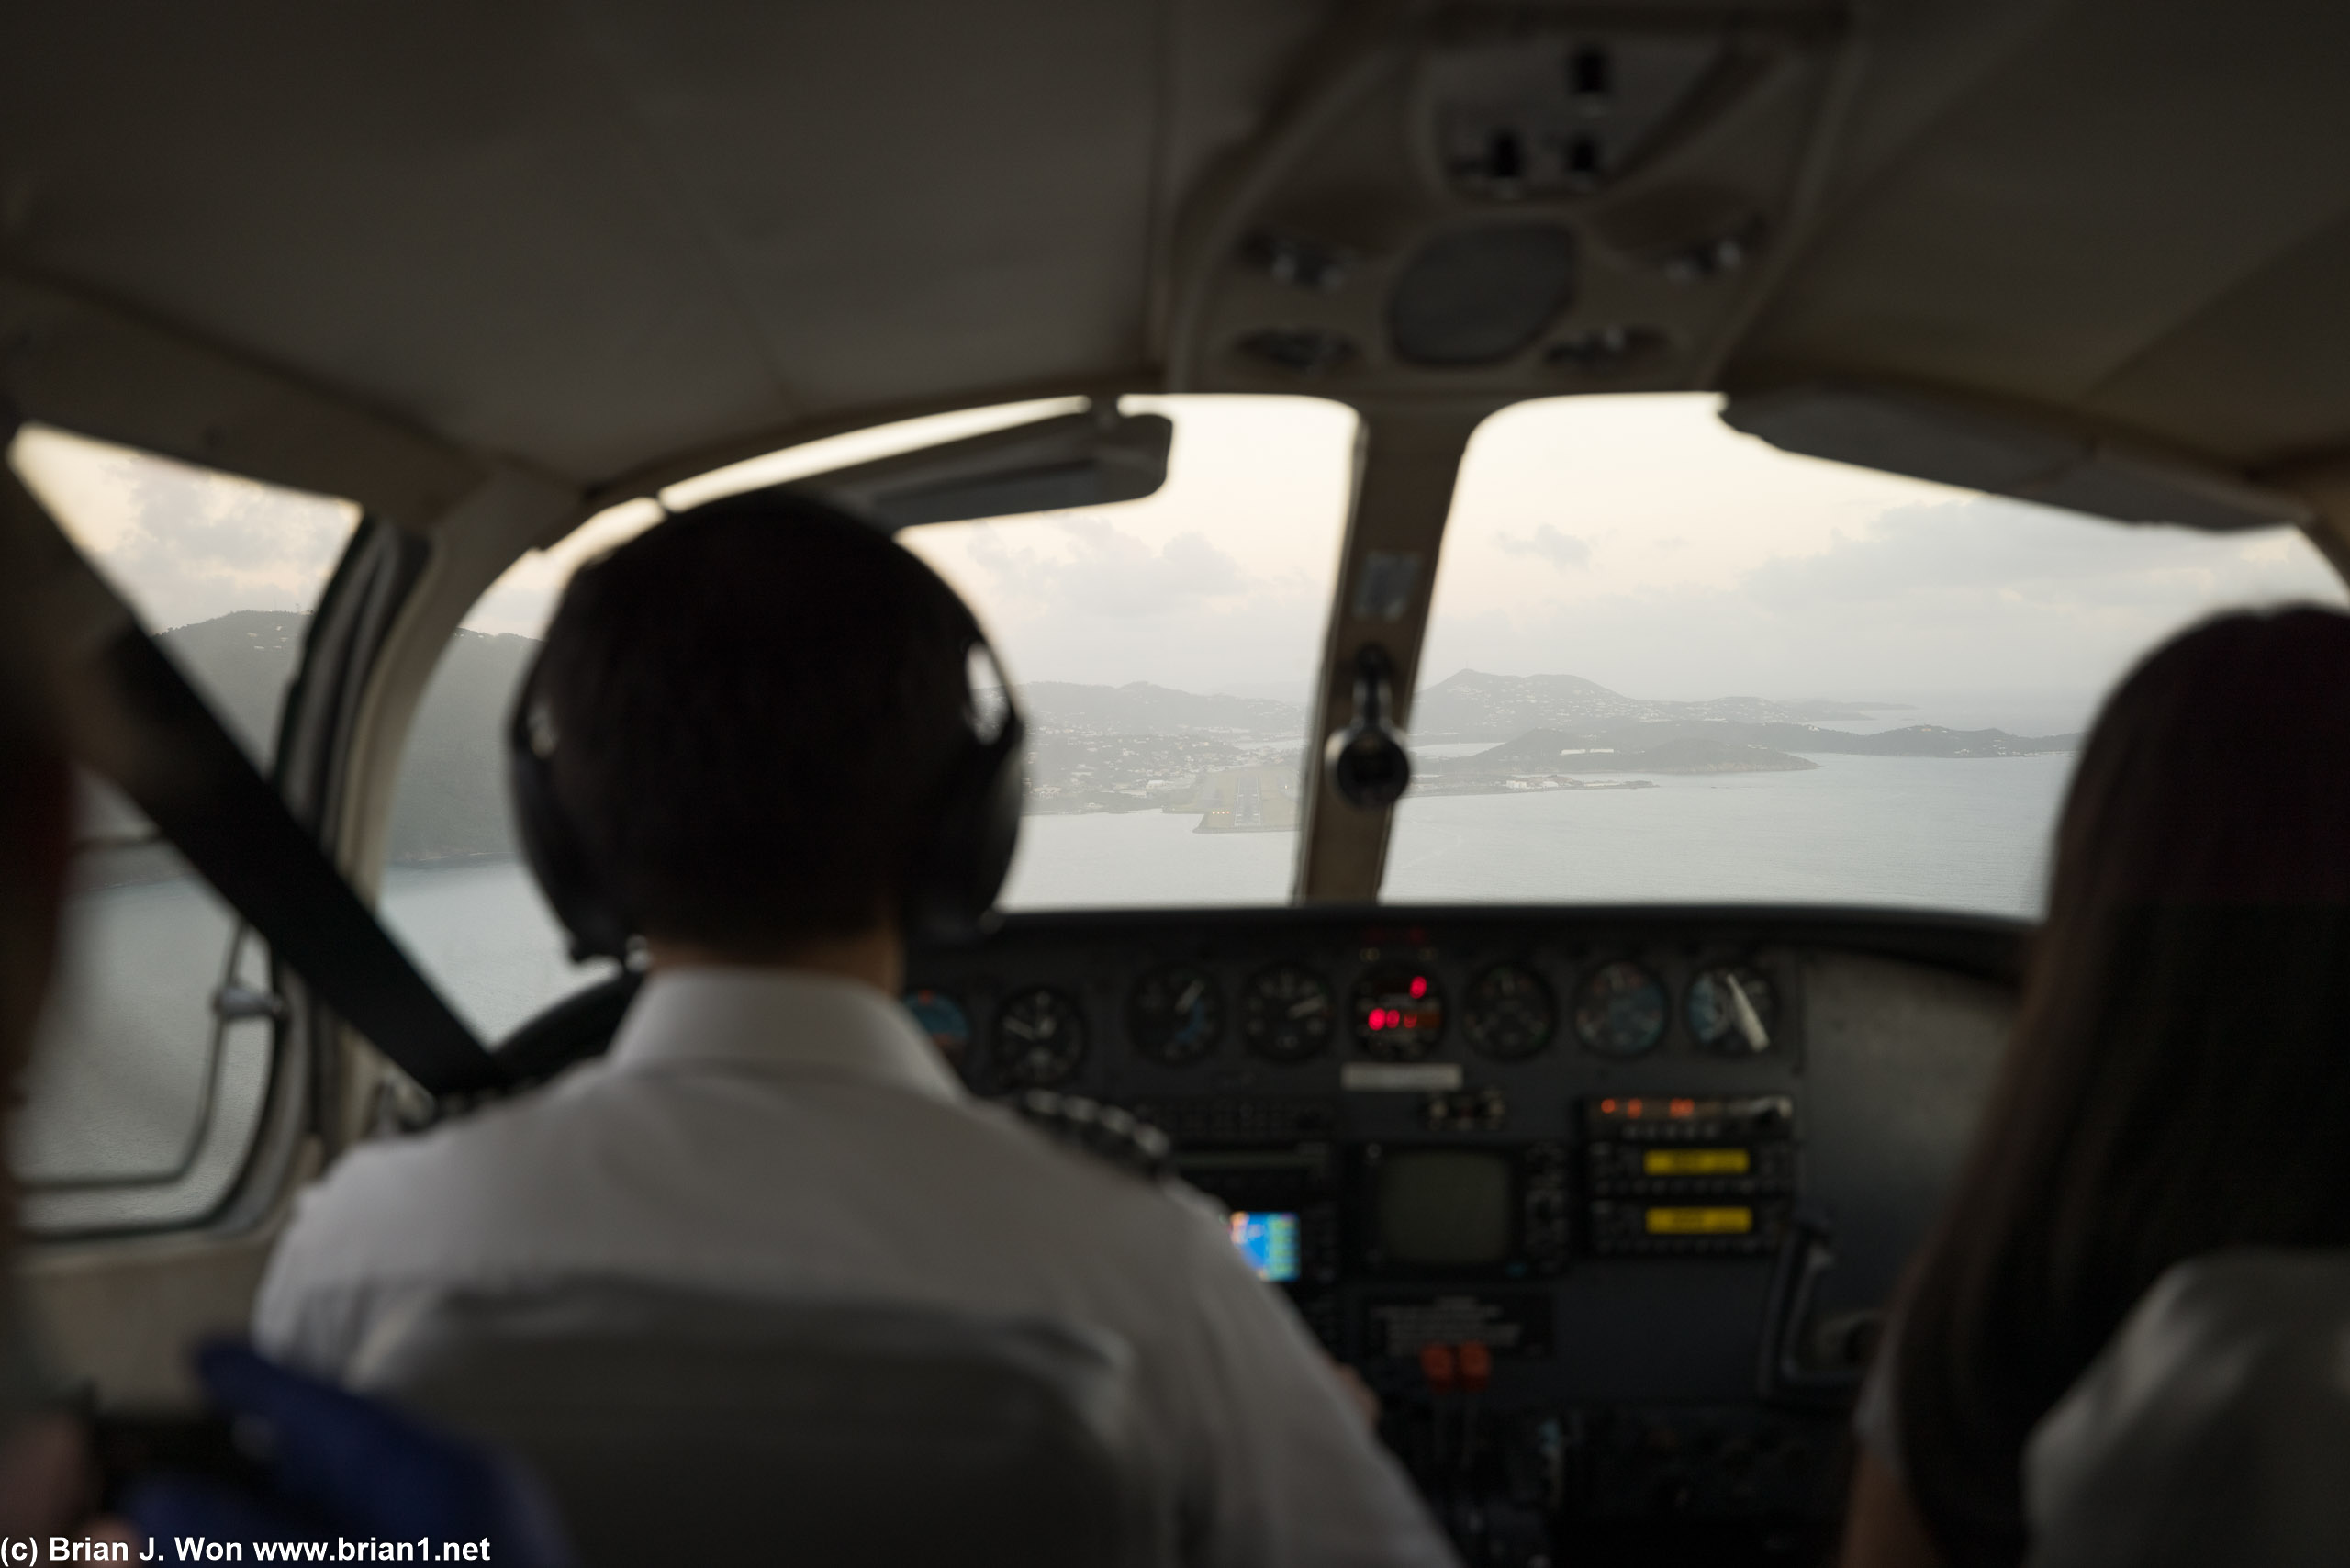 Captain Nicholas lined up for final approach to STT.